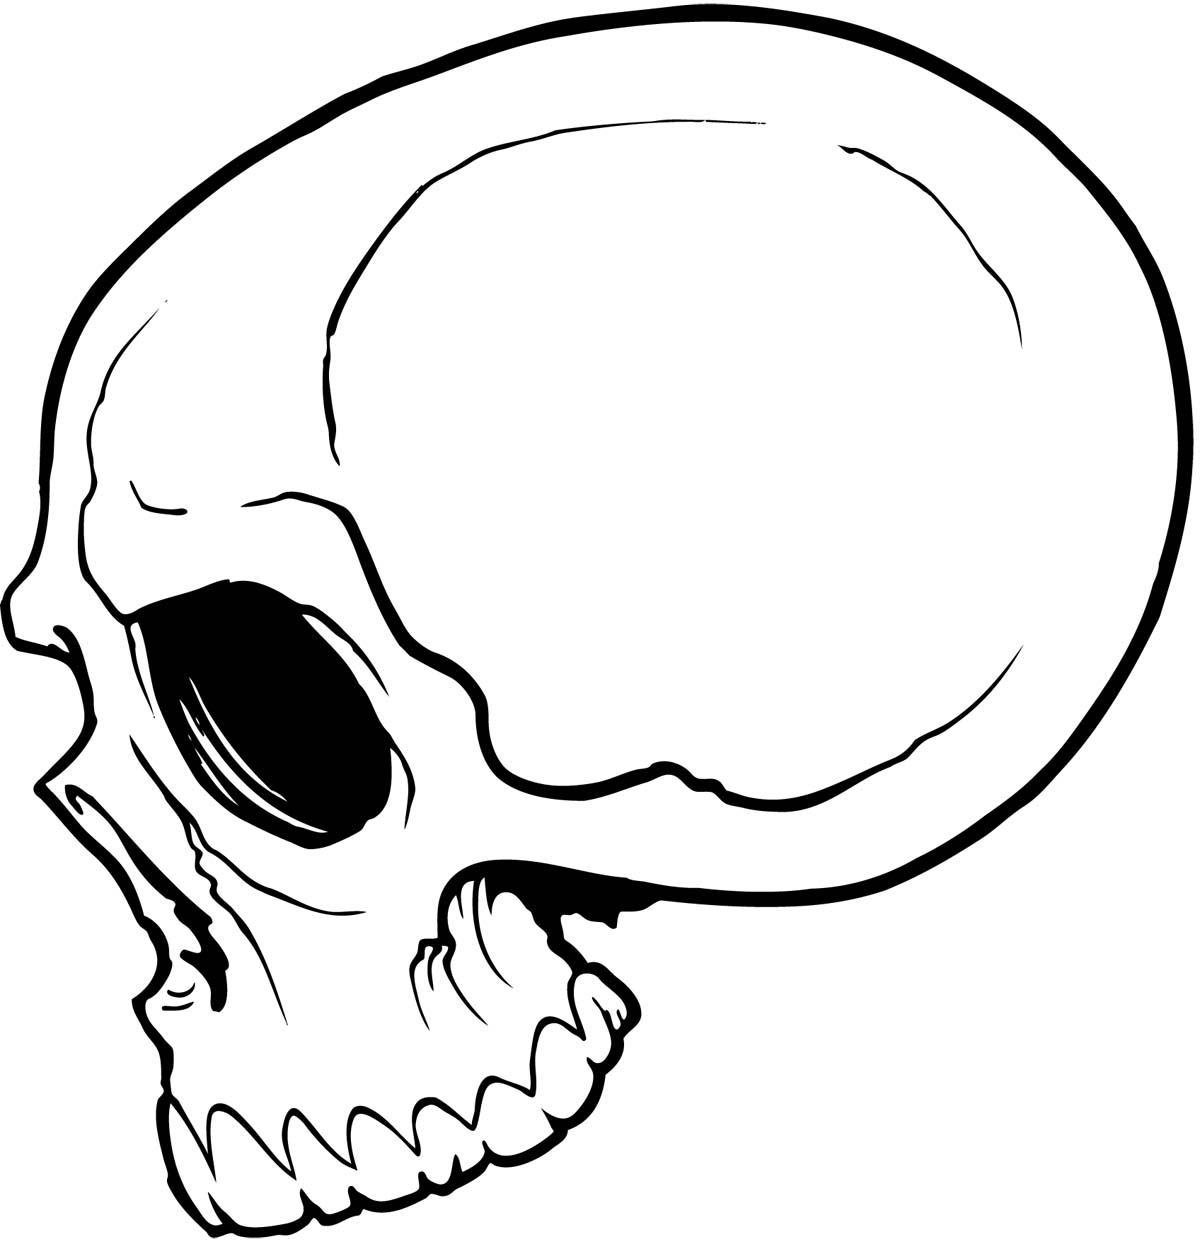 Simple Skull Tattoo Outline | Tattoos Design Ideas - Clipart library 